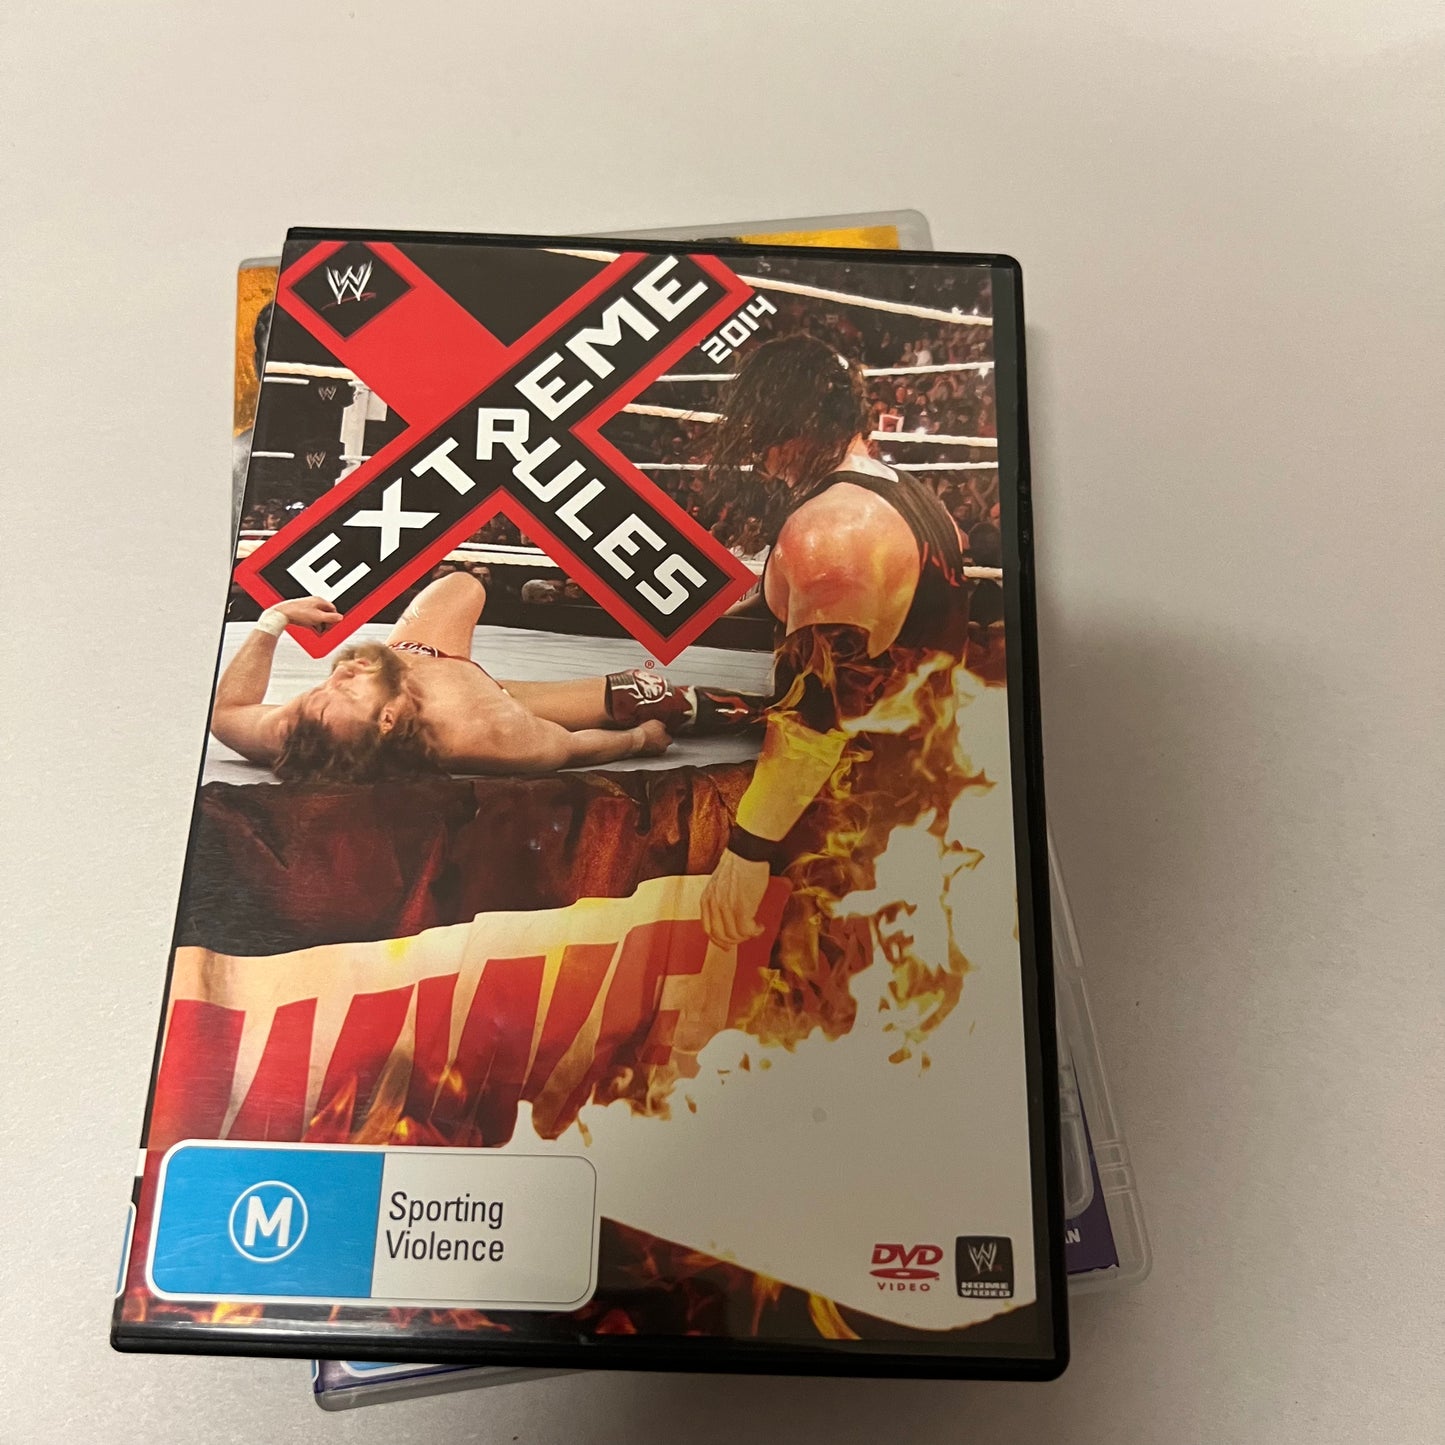 WWE Extreme Rules - DVD